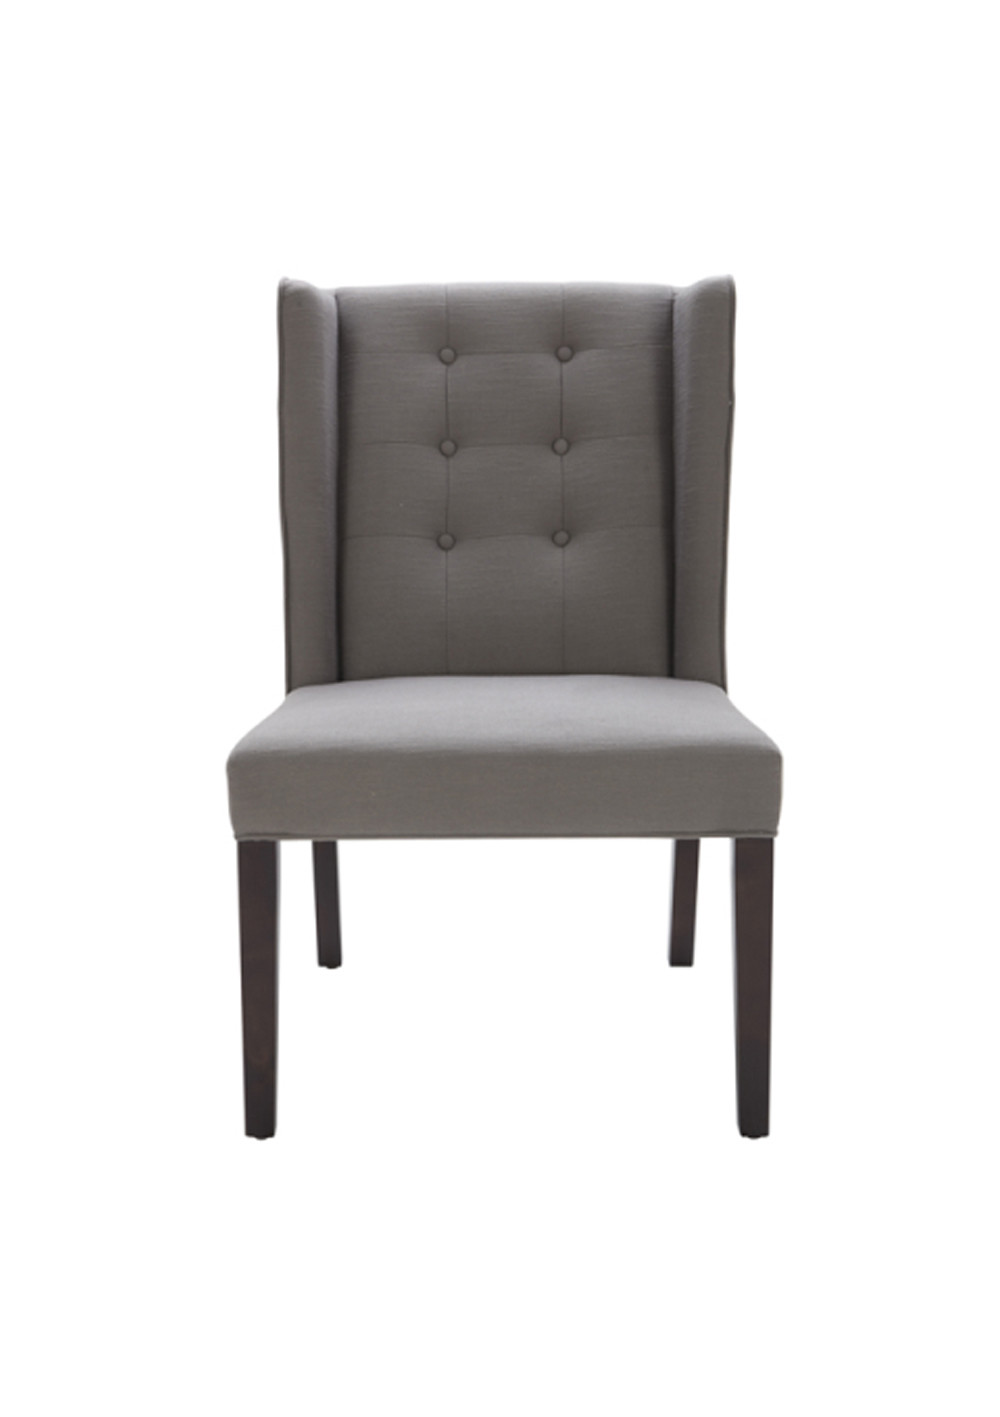 Best Fashion Restaurant Dining Chairs Upholstered Fabric And Wooden With Sponge Seat wholesale